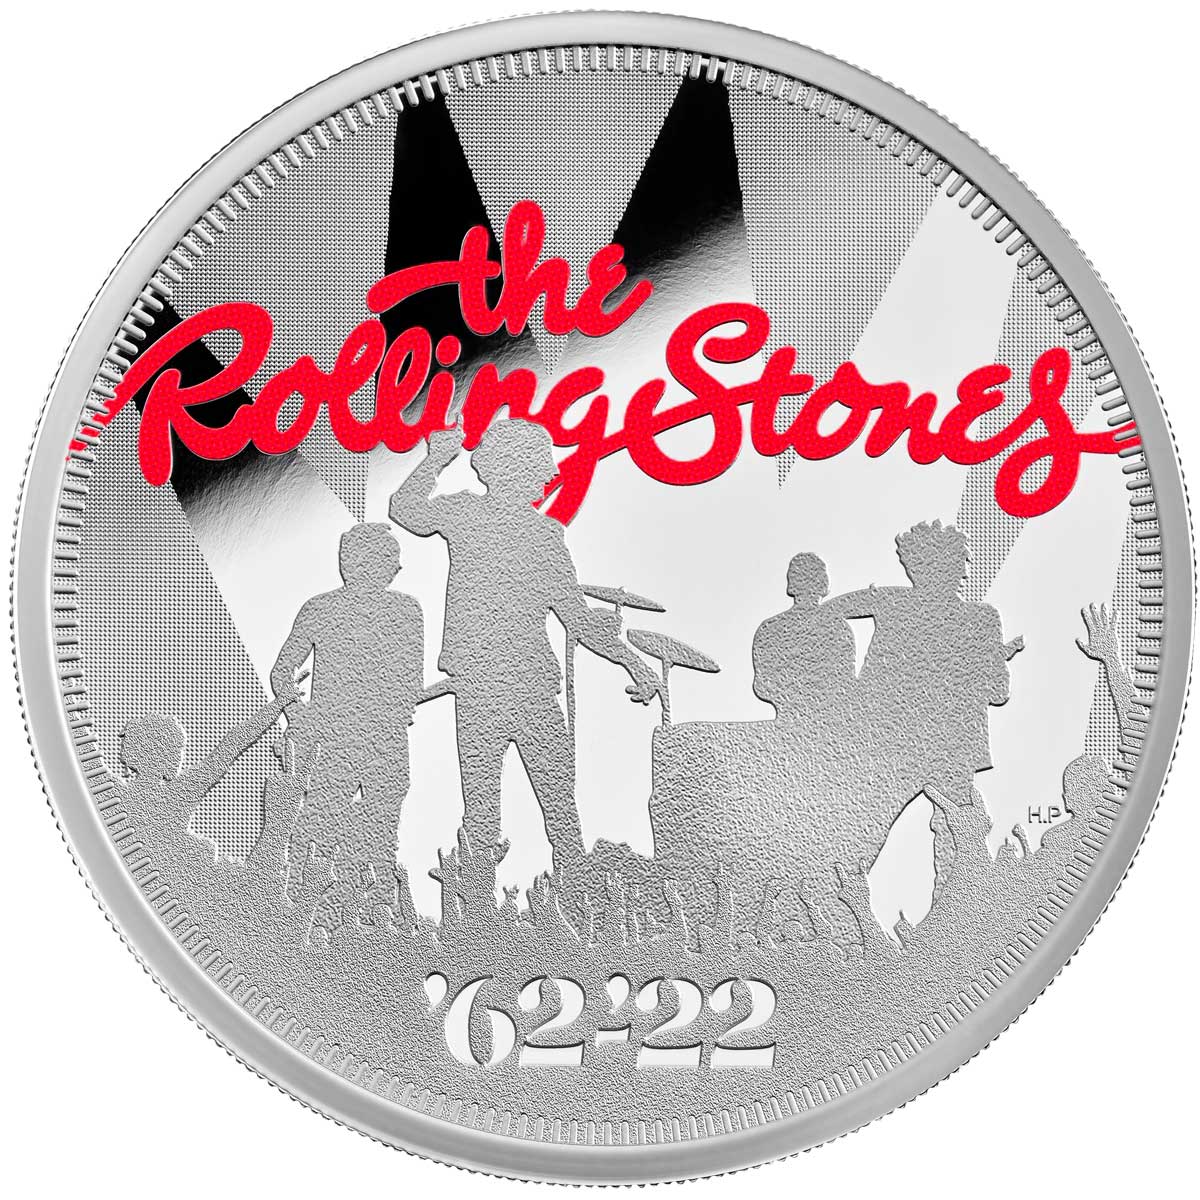 THE ROLLING STONES 2022 UK one ounce silver proof coin